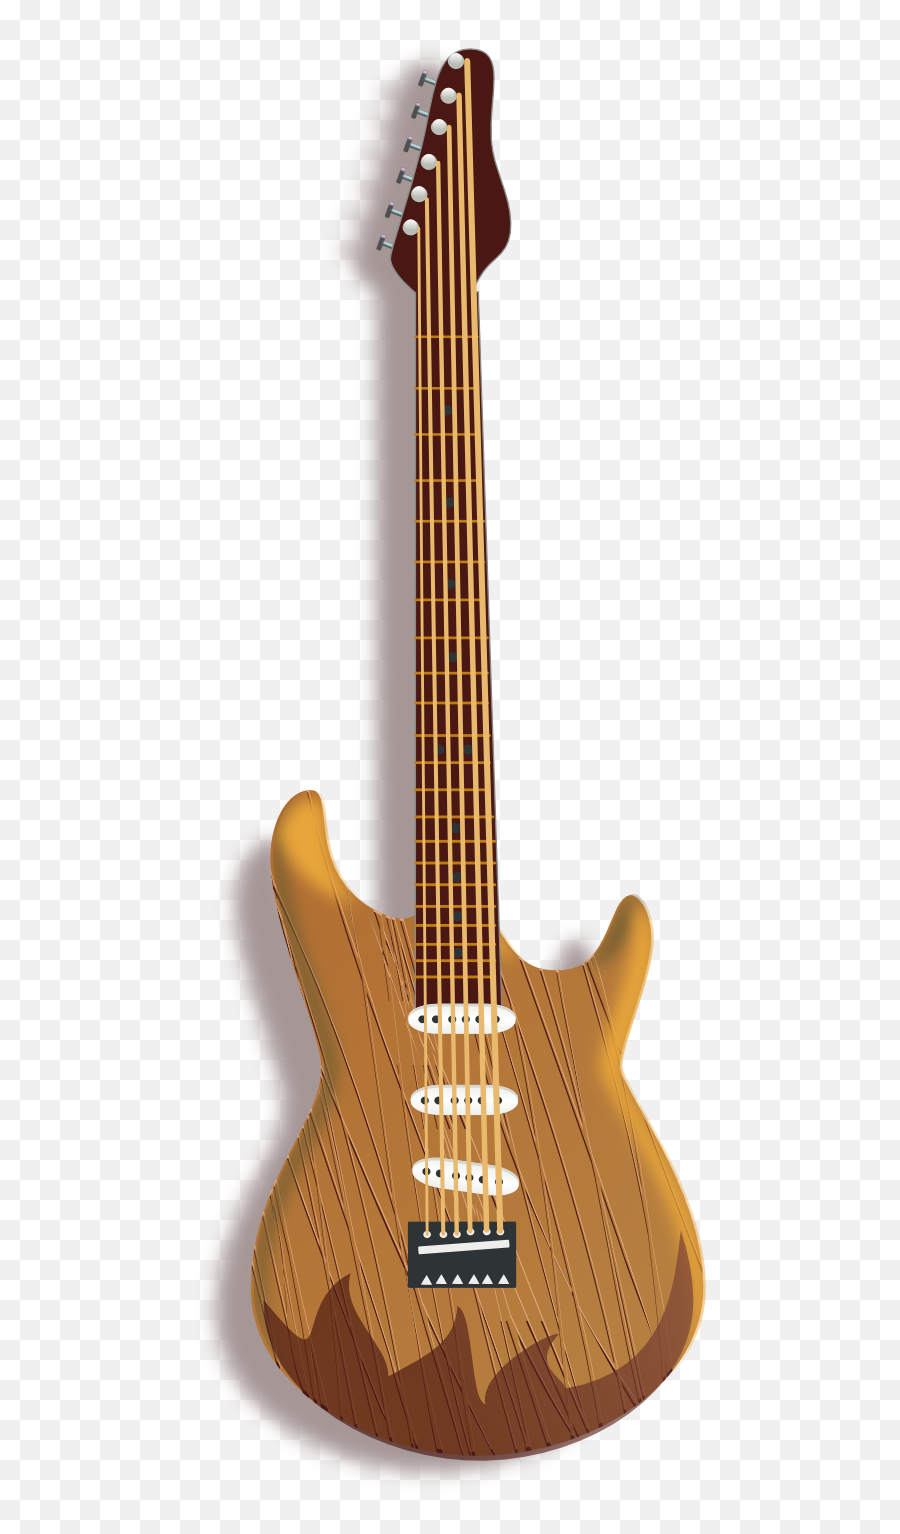 Wood Guitar Clipart I2clipart - Royalty Free Public Domain Riff Instrument Emoji,Electric Guitar Clipart